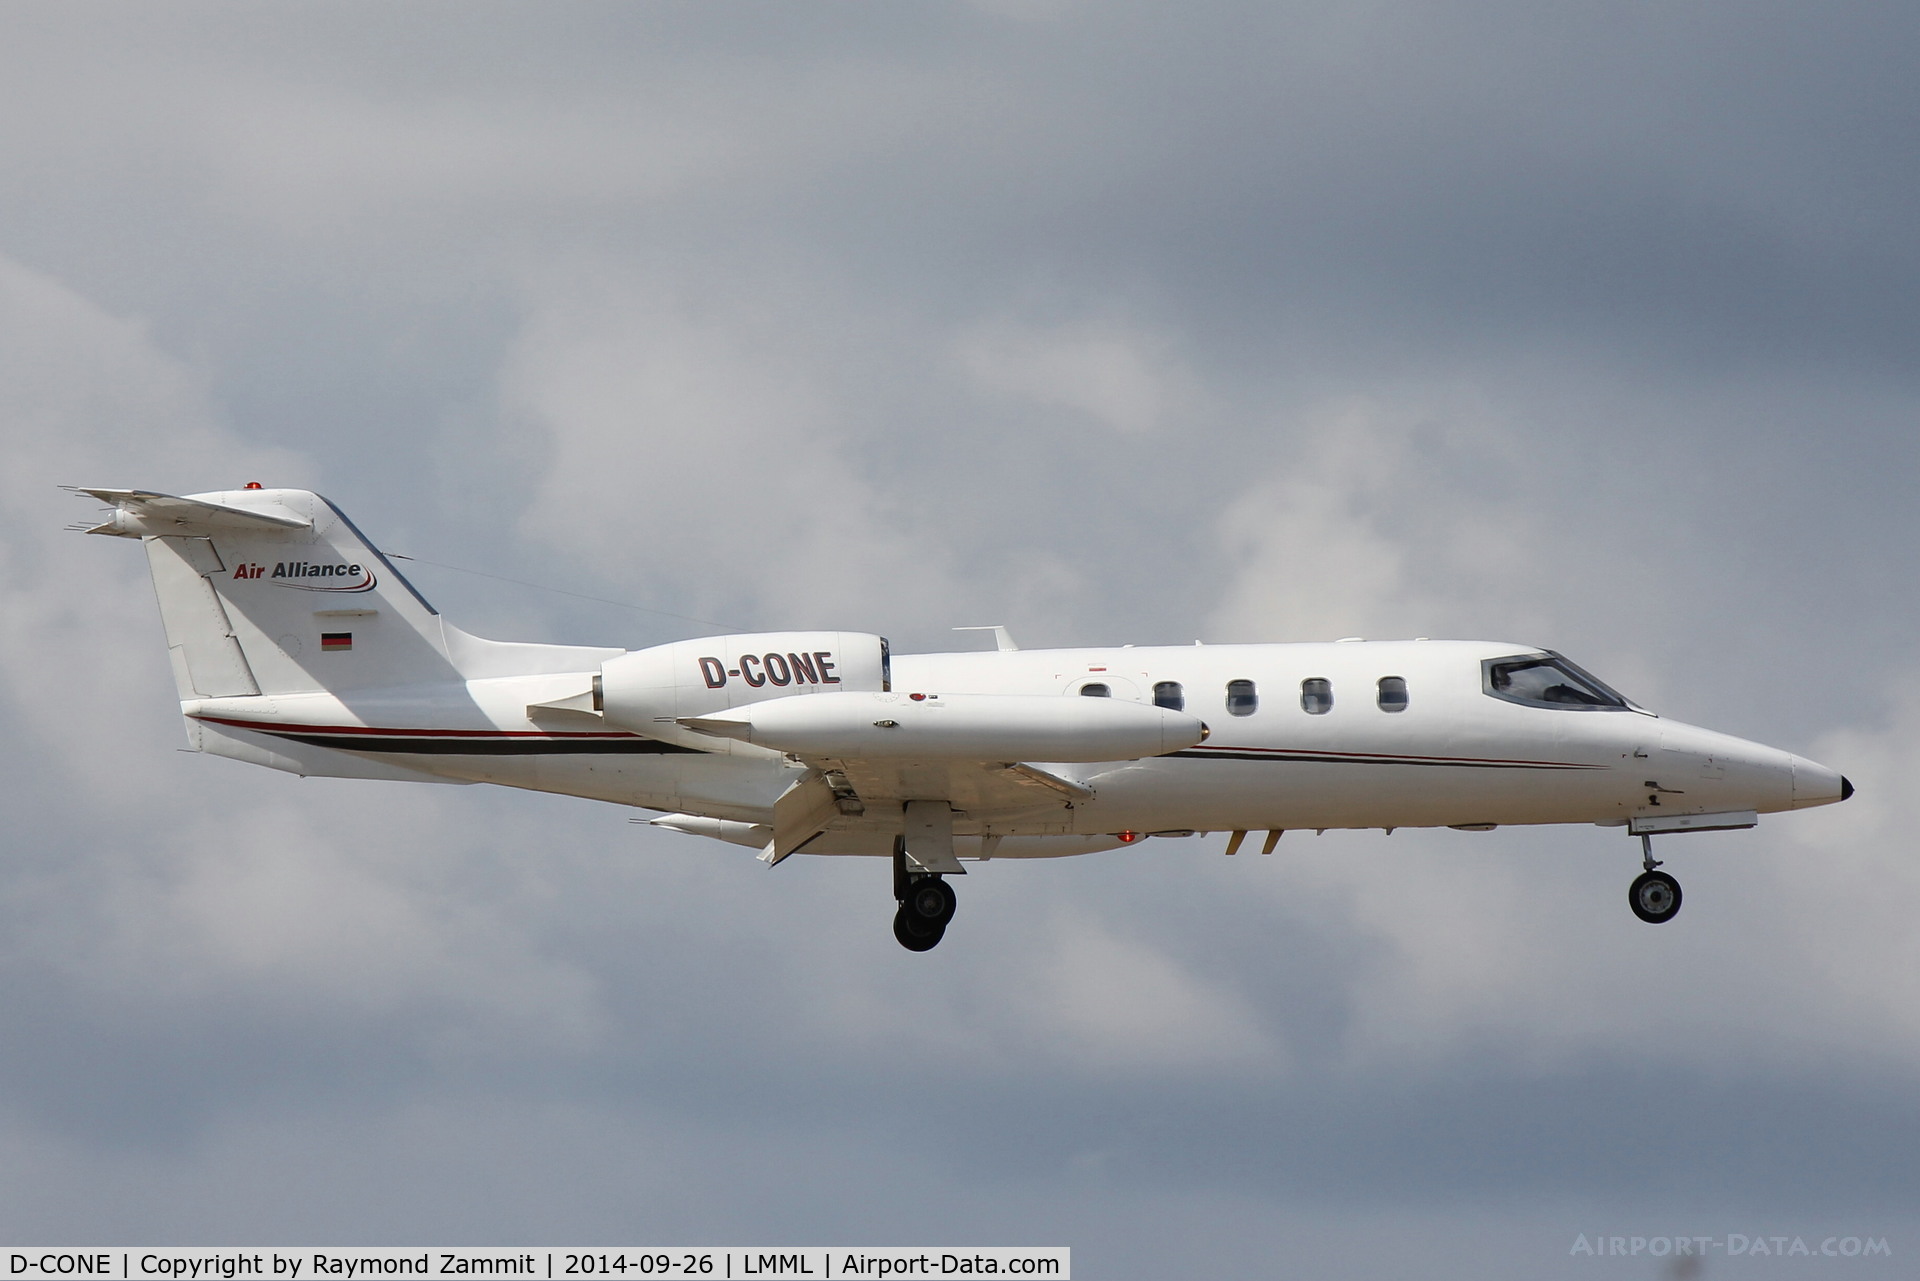 D-CONE, 1977 Learjet 35A C/N 35A-111, Learjet35 D-CONE of Air Alliance Express